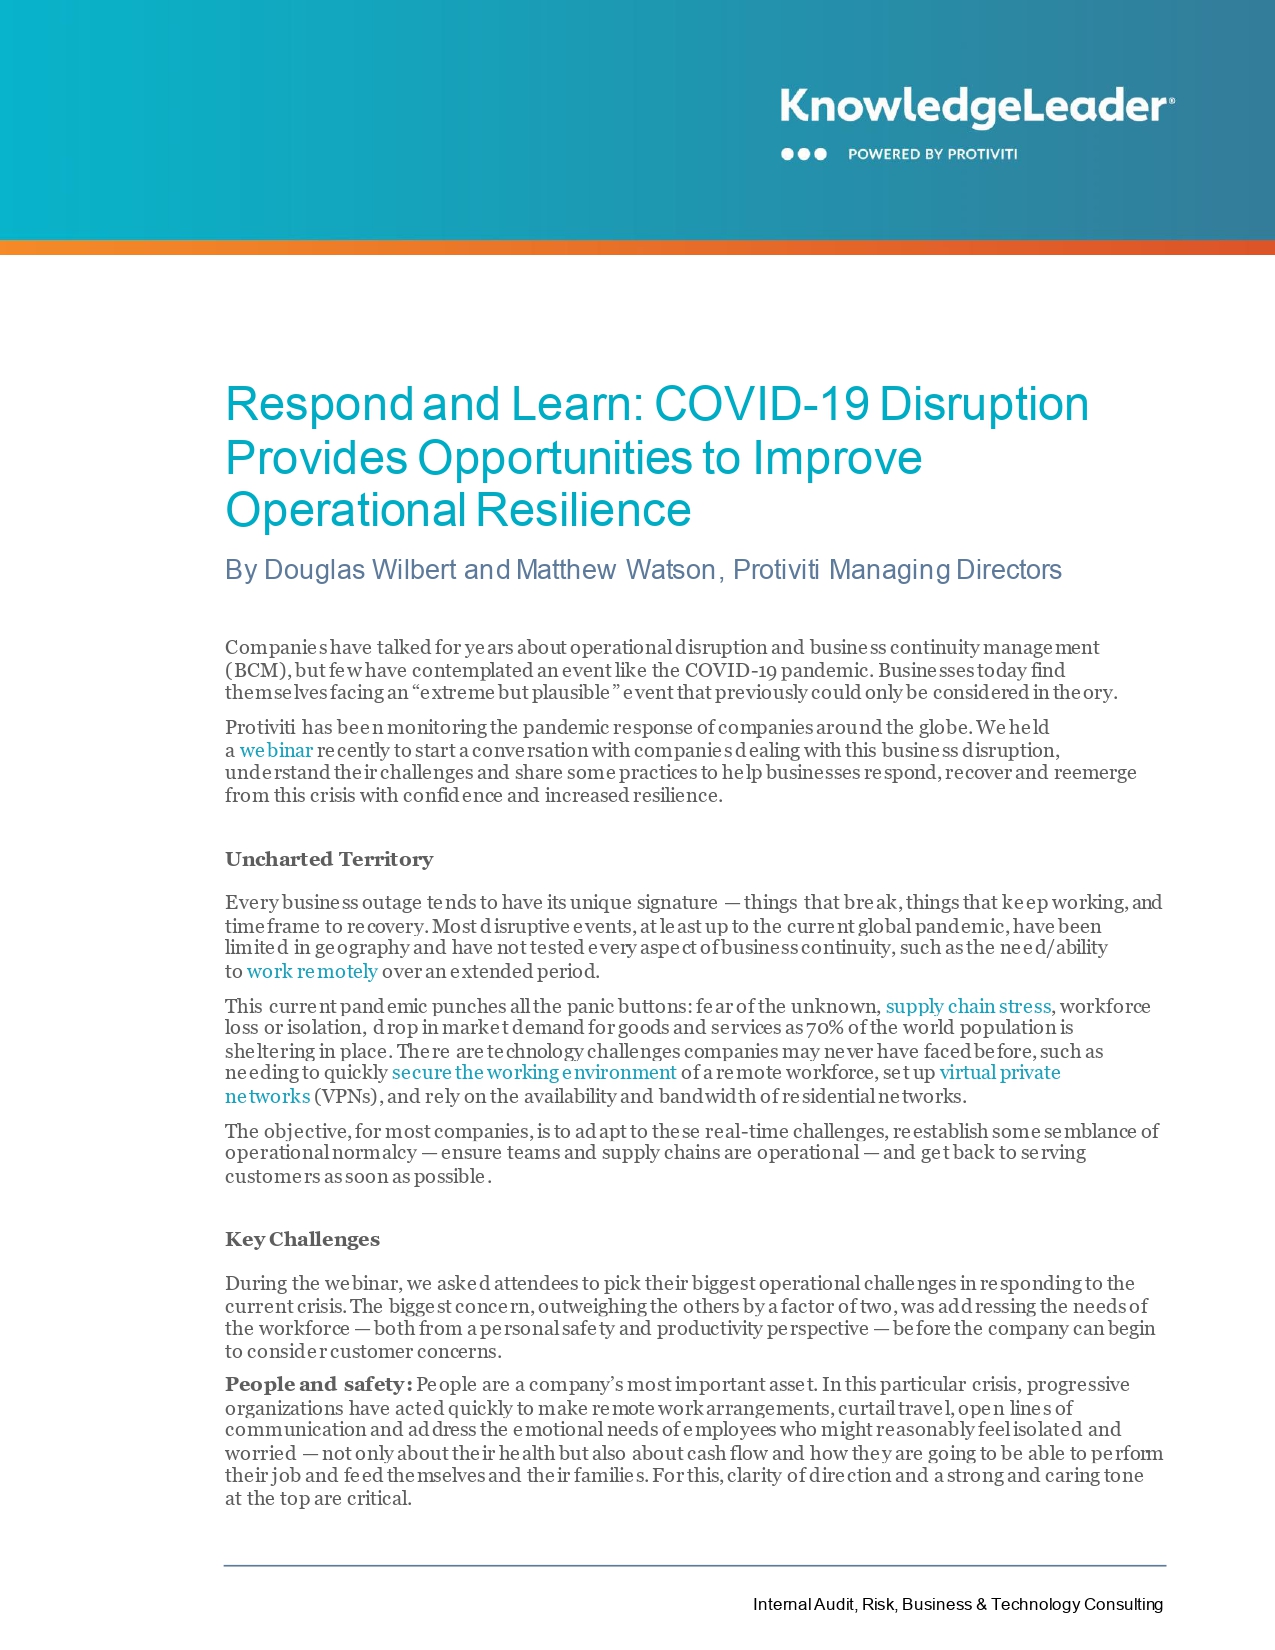 Respond and Learn: COVID-19 Disruption Provides Opportunities to Improve Operational Resilience